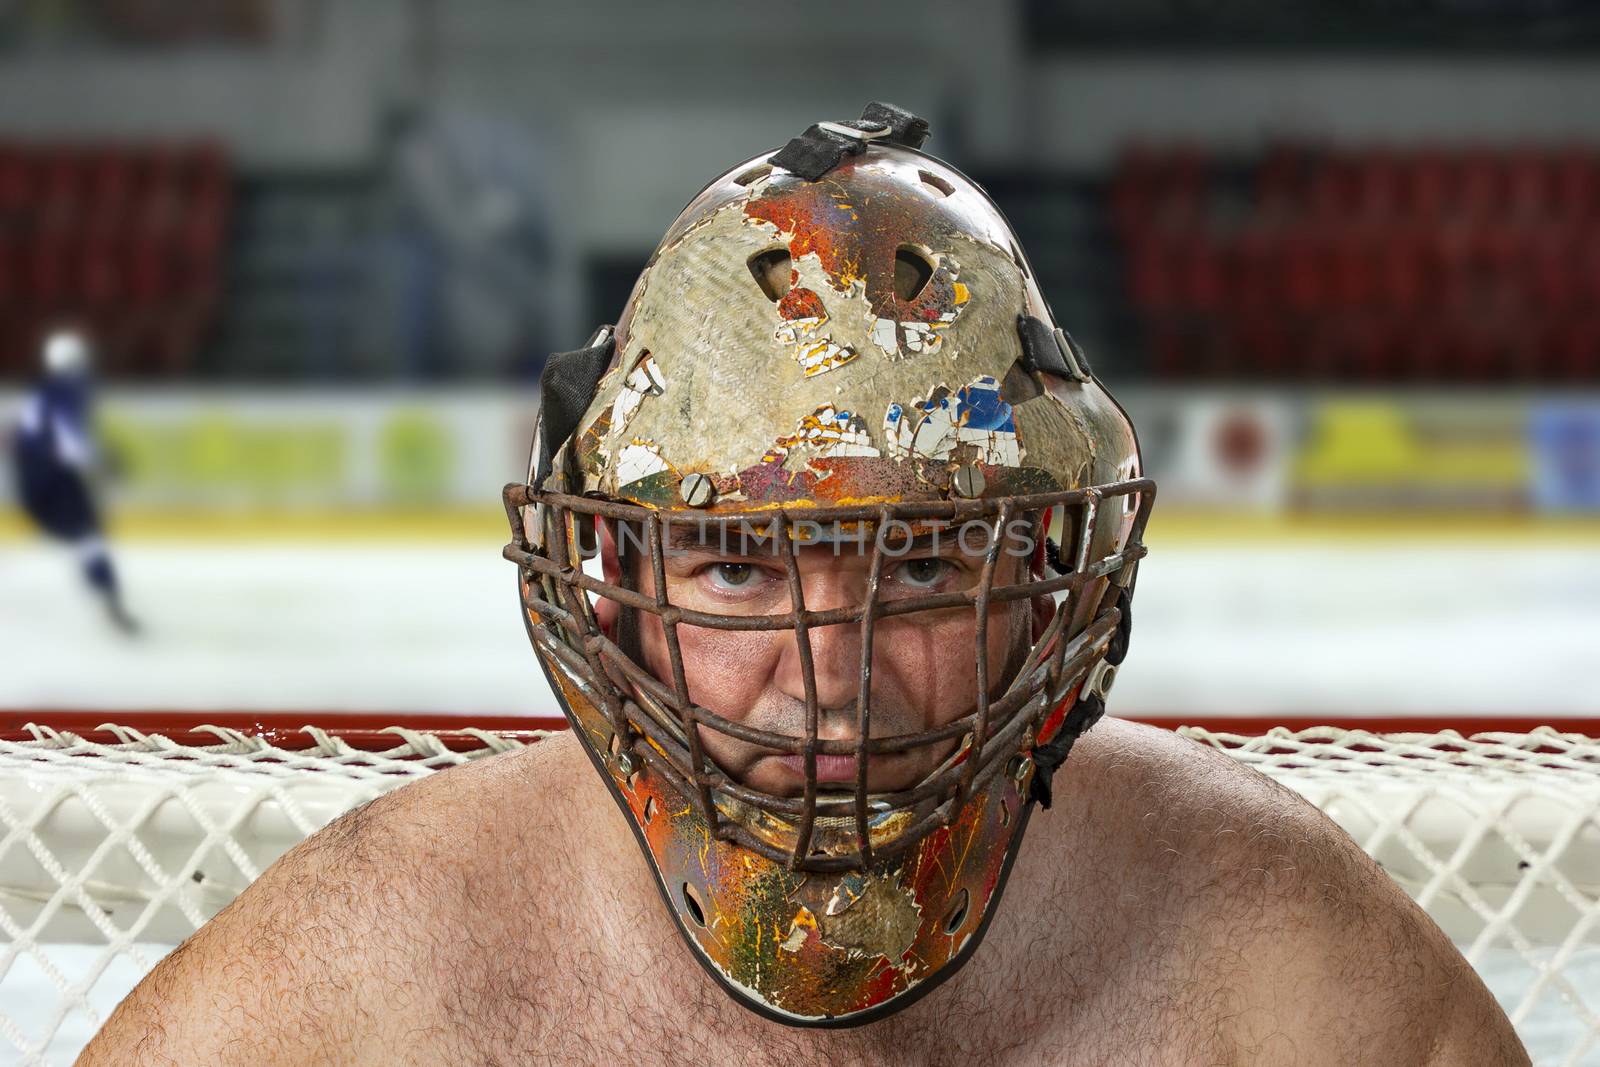 Goalkeeper in an old hockey mask on the background of a hockey field